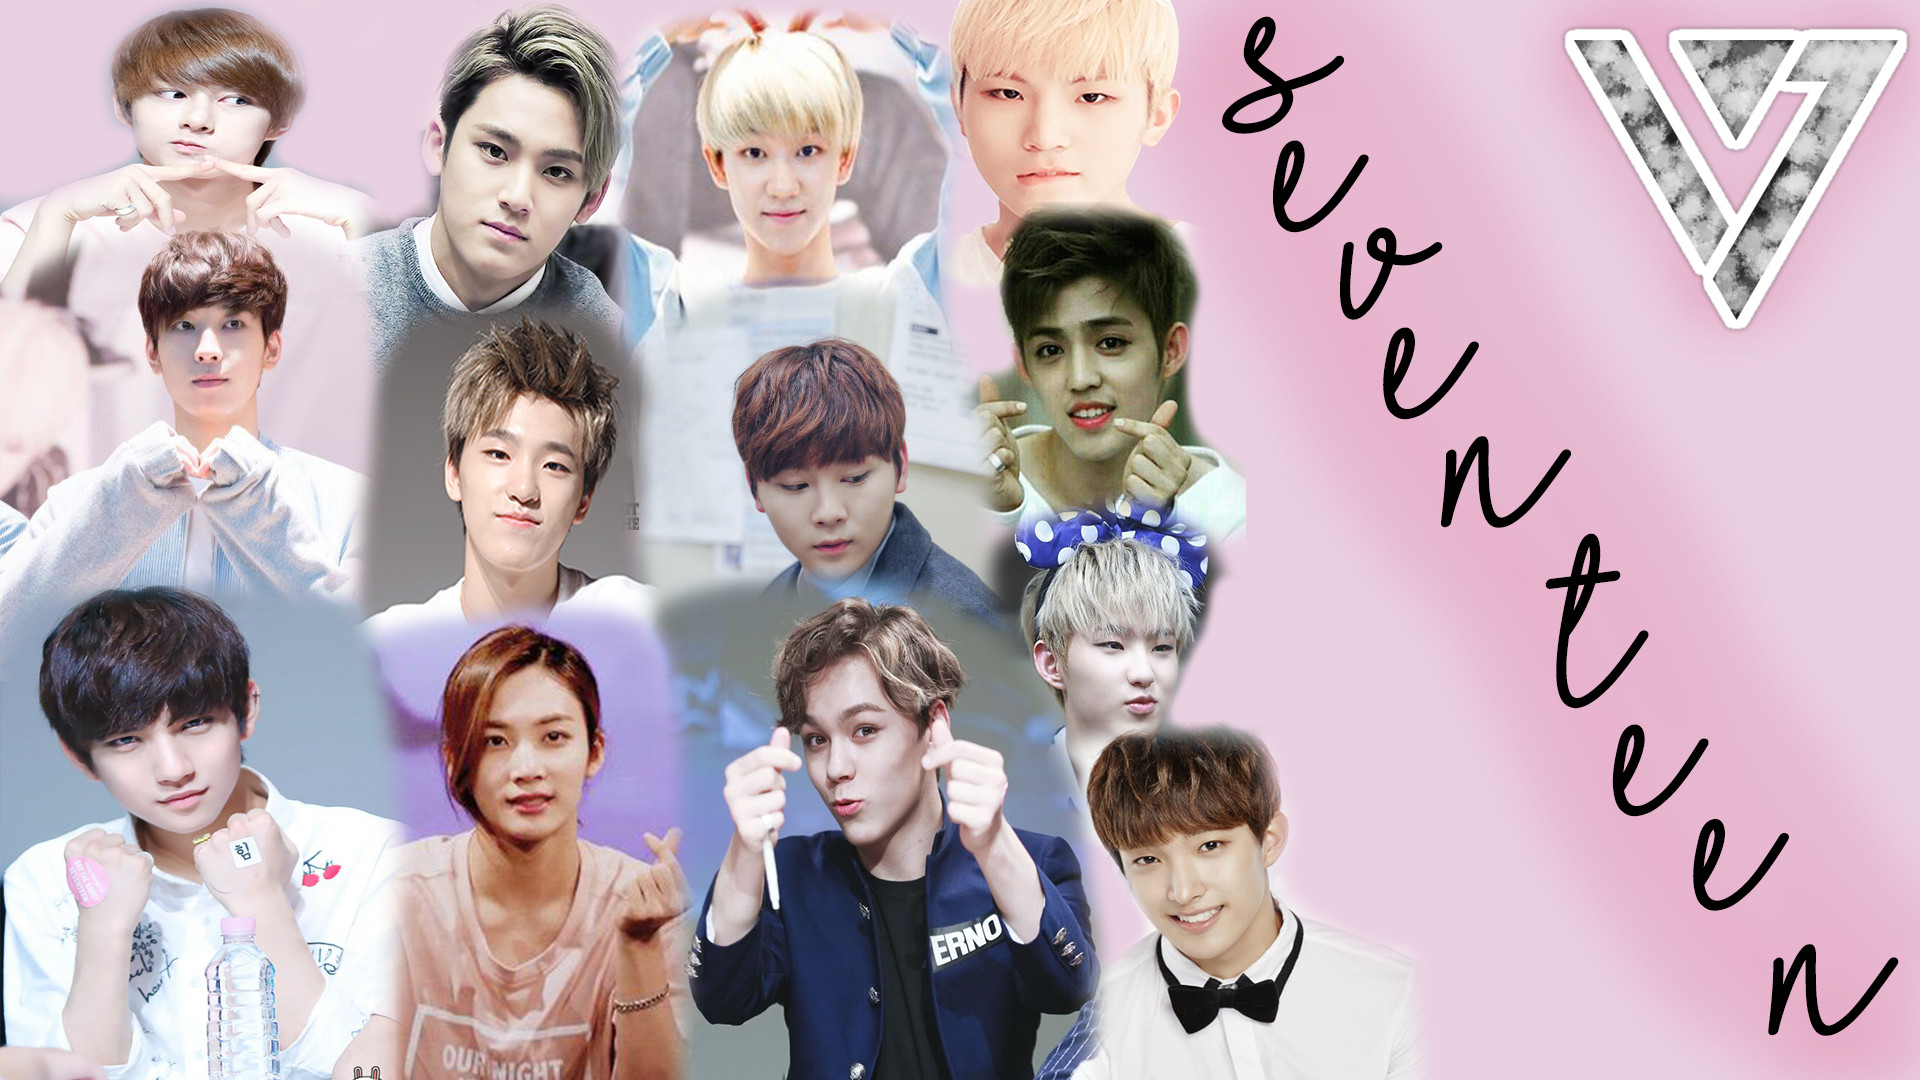 1920x1080 ... Seventeen PC Wallpaper #1 by WooziPoozi